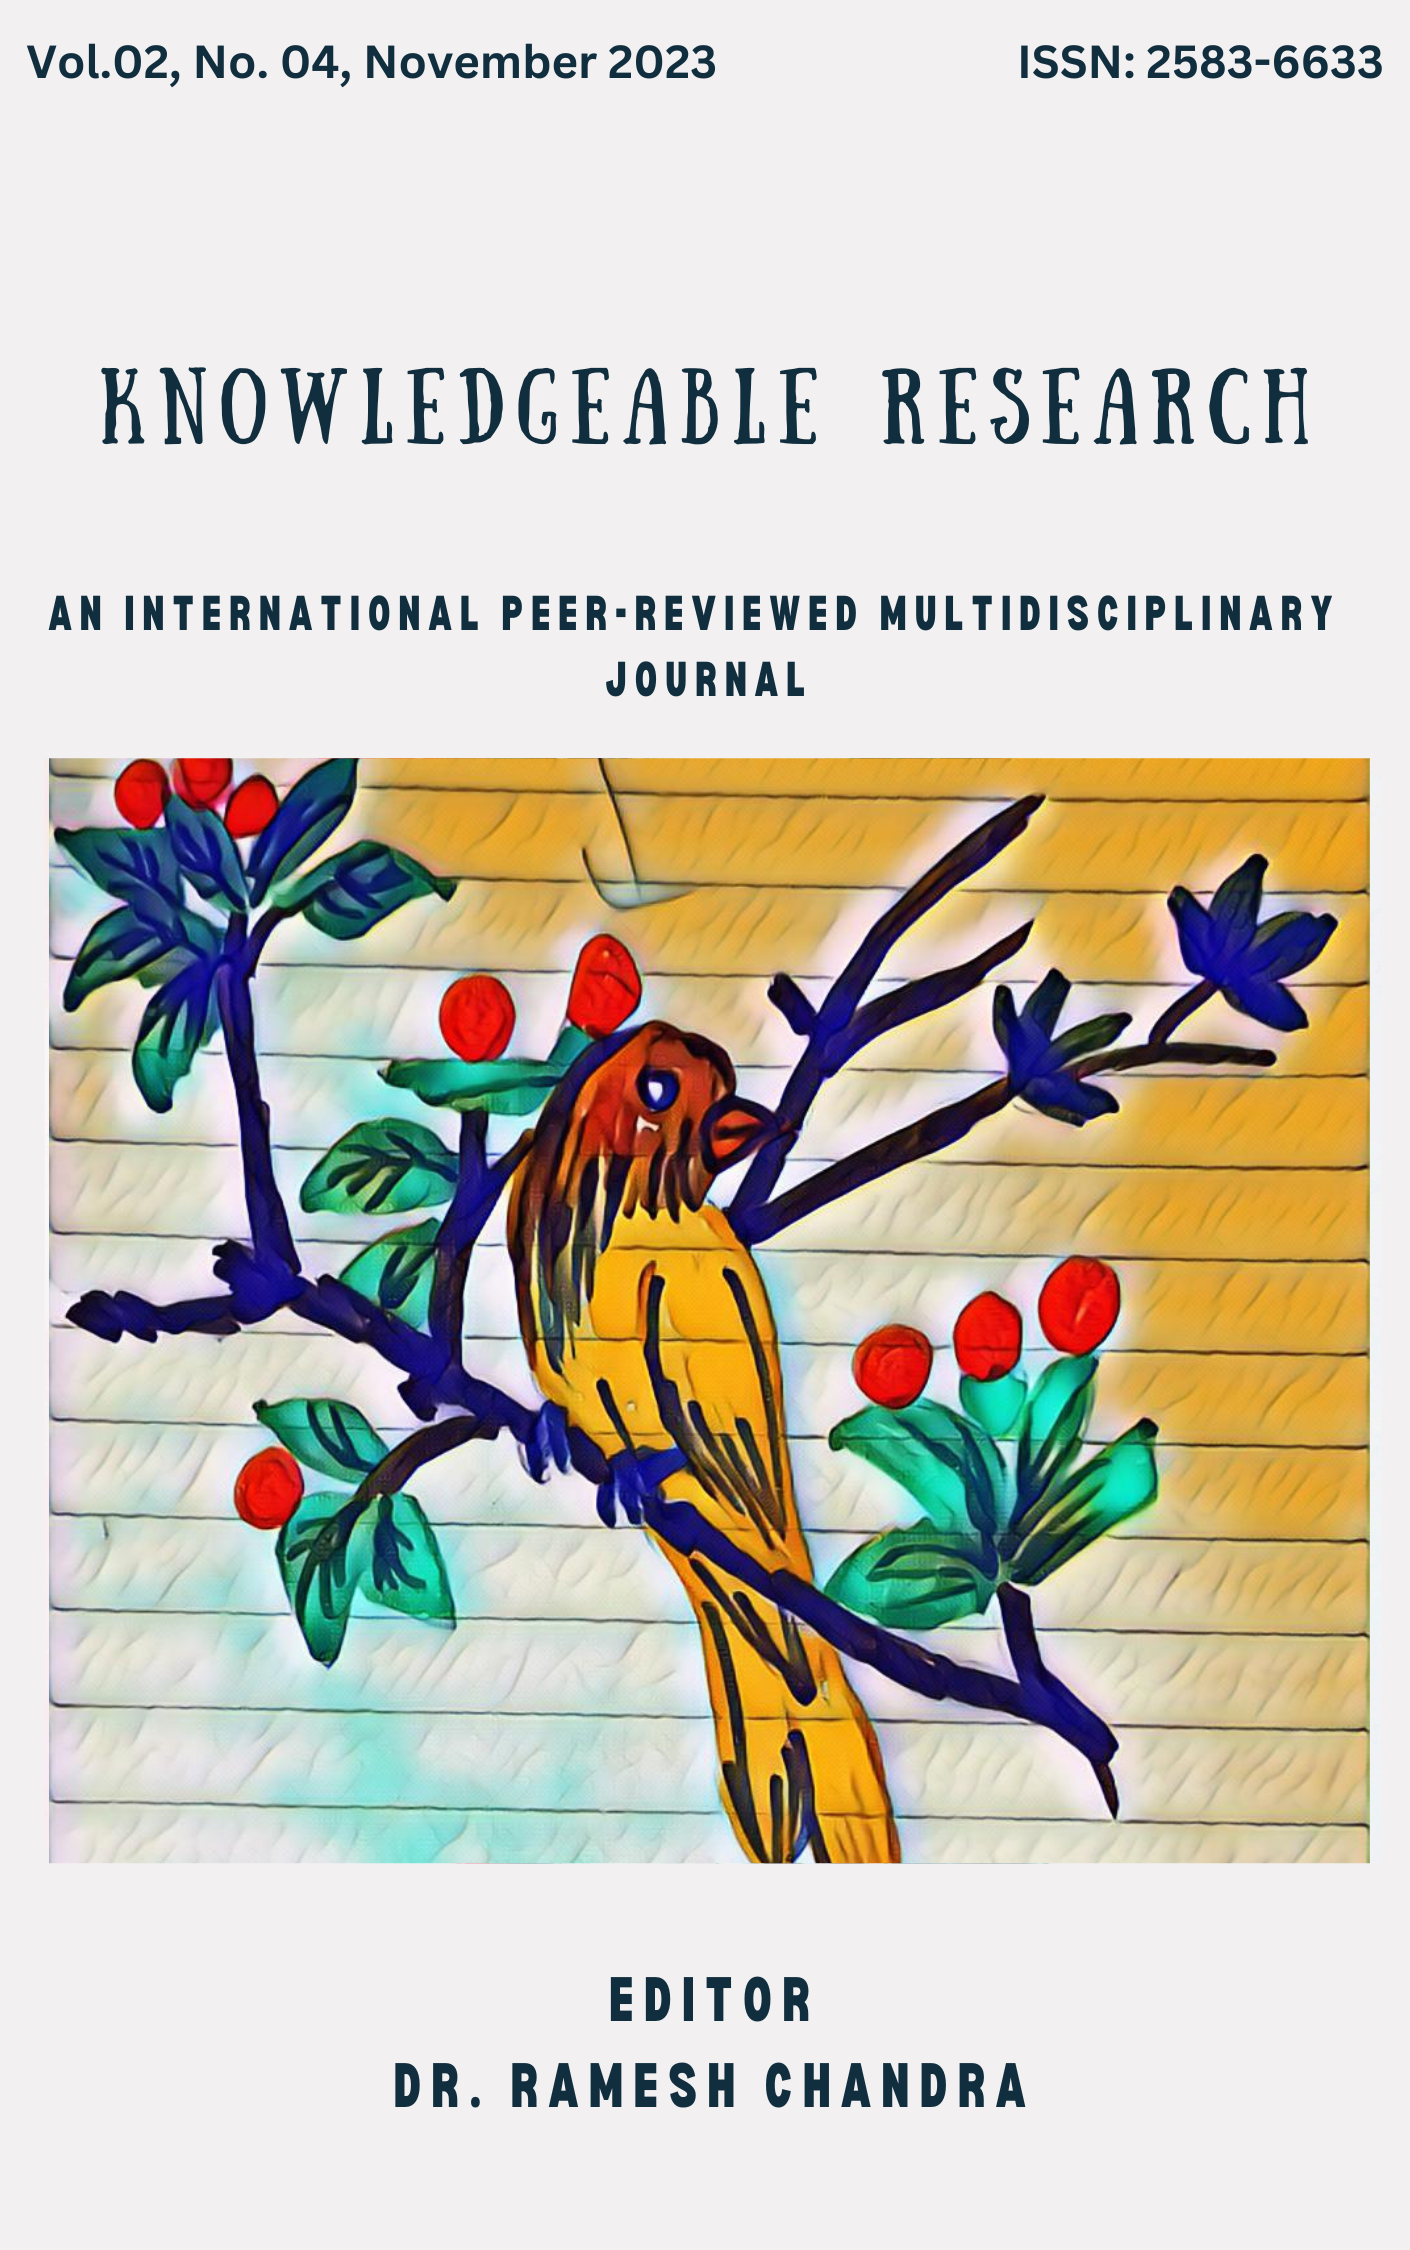 					View Vol. 2 No. 04 (2023): Knowledgeable Research,Vol.02,No.,04,November 2023
				